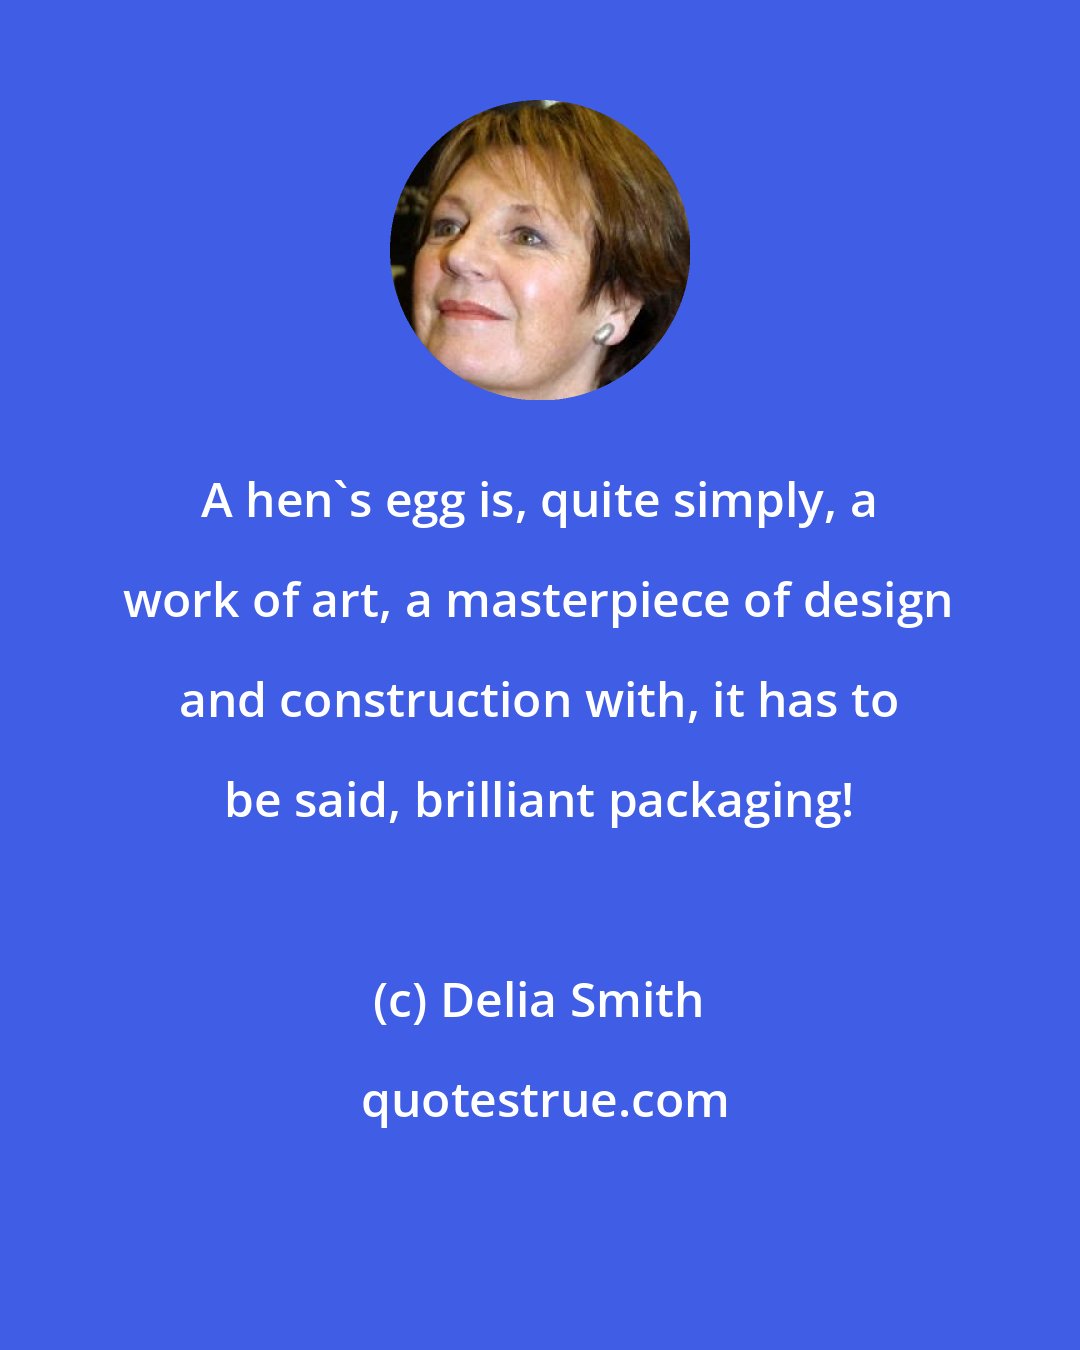 Delia Smith: A hen's egg is, quite simply, a work of art, a masterpiece of design and construction with, it has to be said, brilliant packaging!